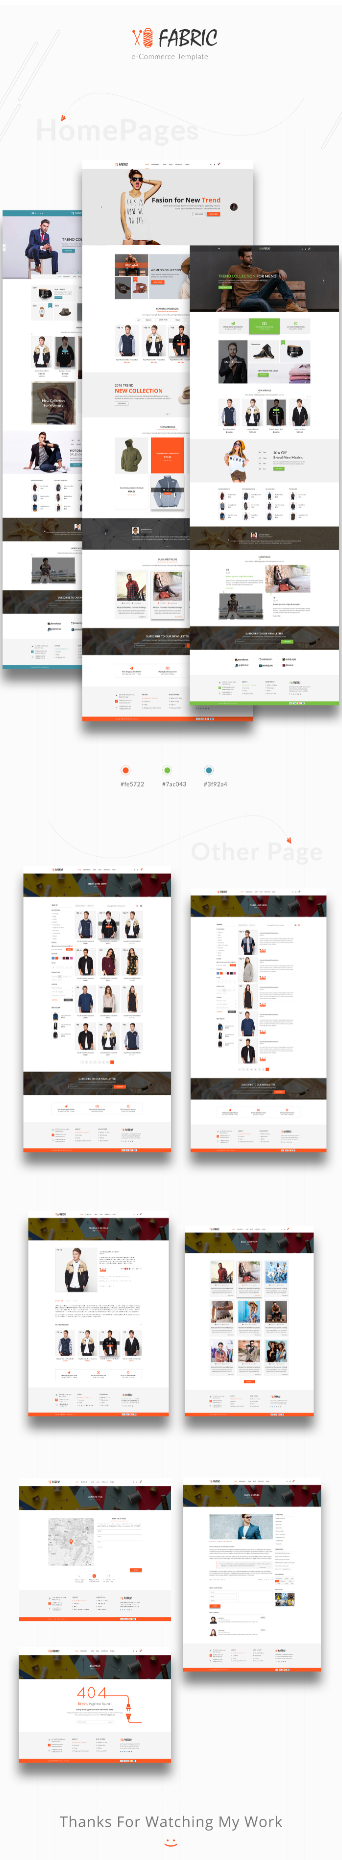 Fabric - Bootstrap eCommerce Website Template